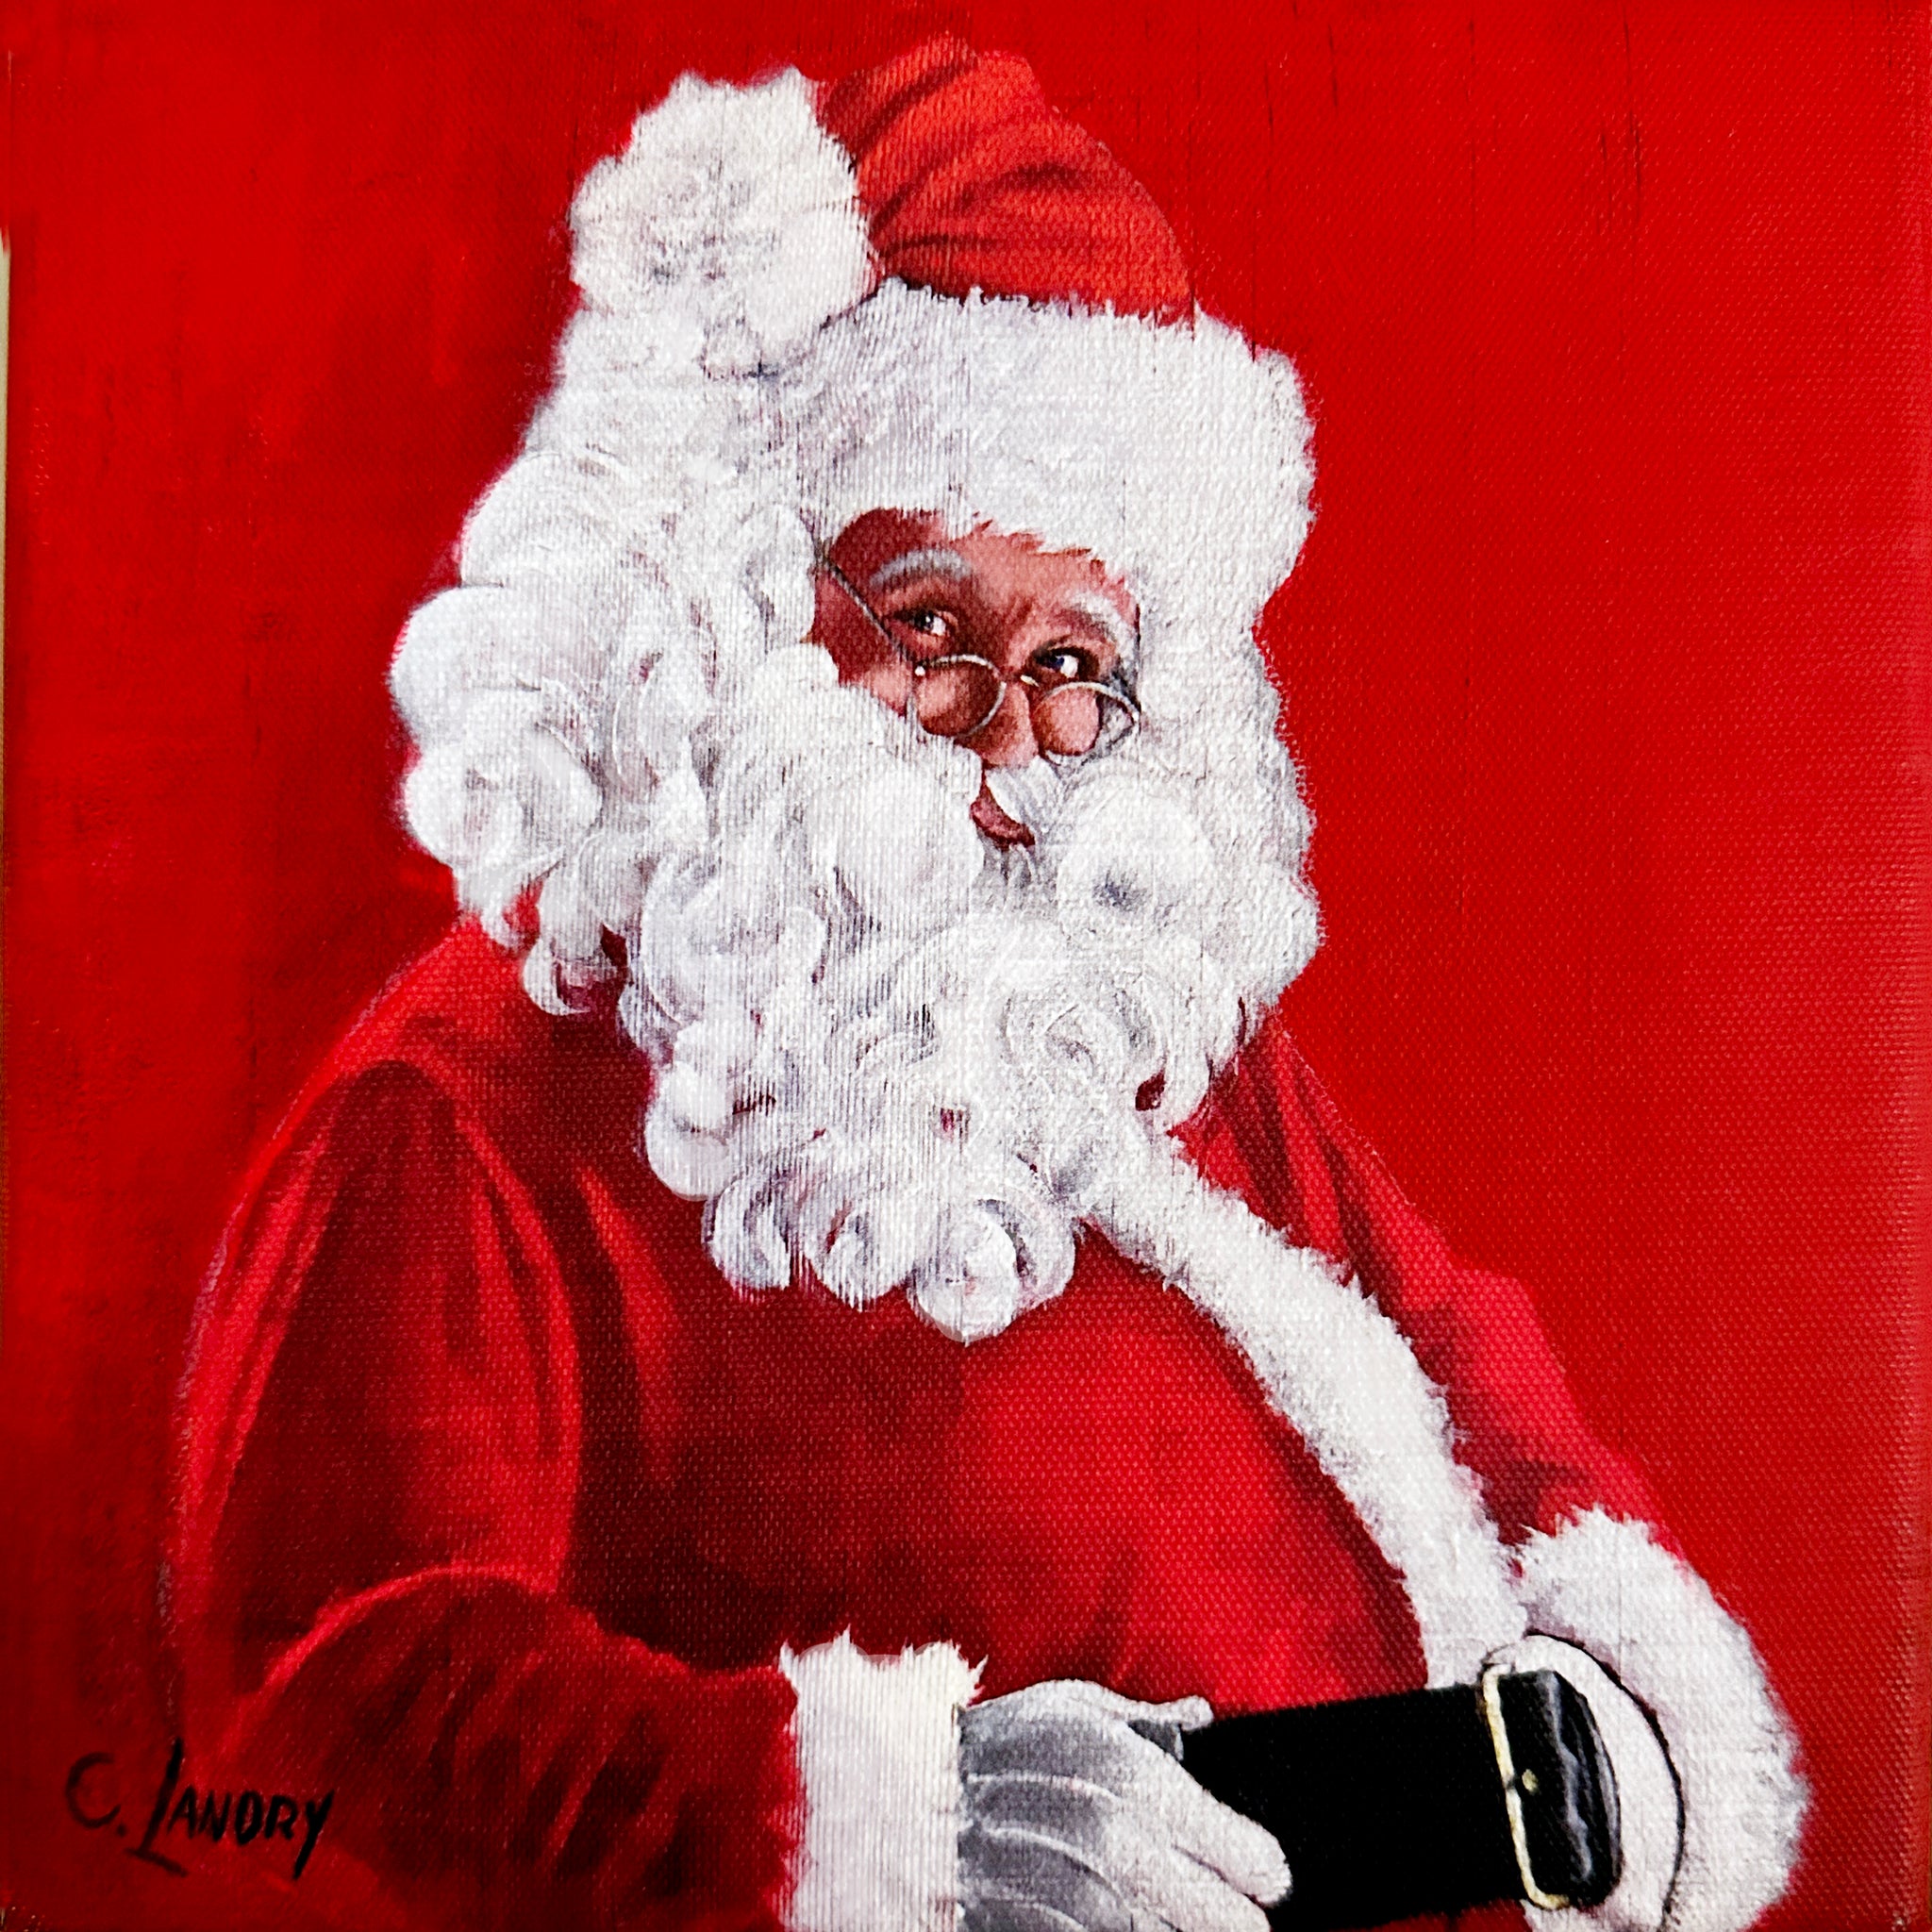 Christmas Canvas Wall Art 8"x 8" on Canvas Copy, Painted by Artist Carol Landry